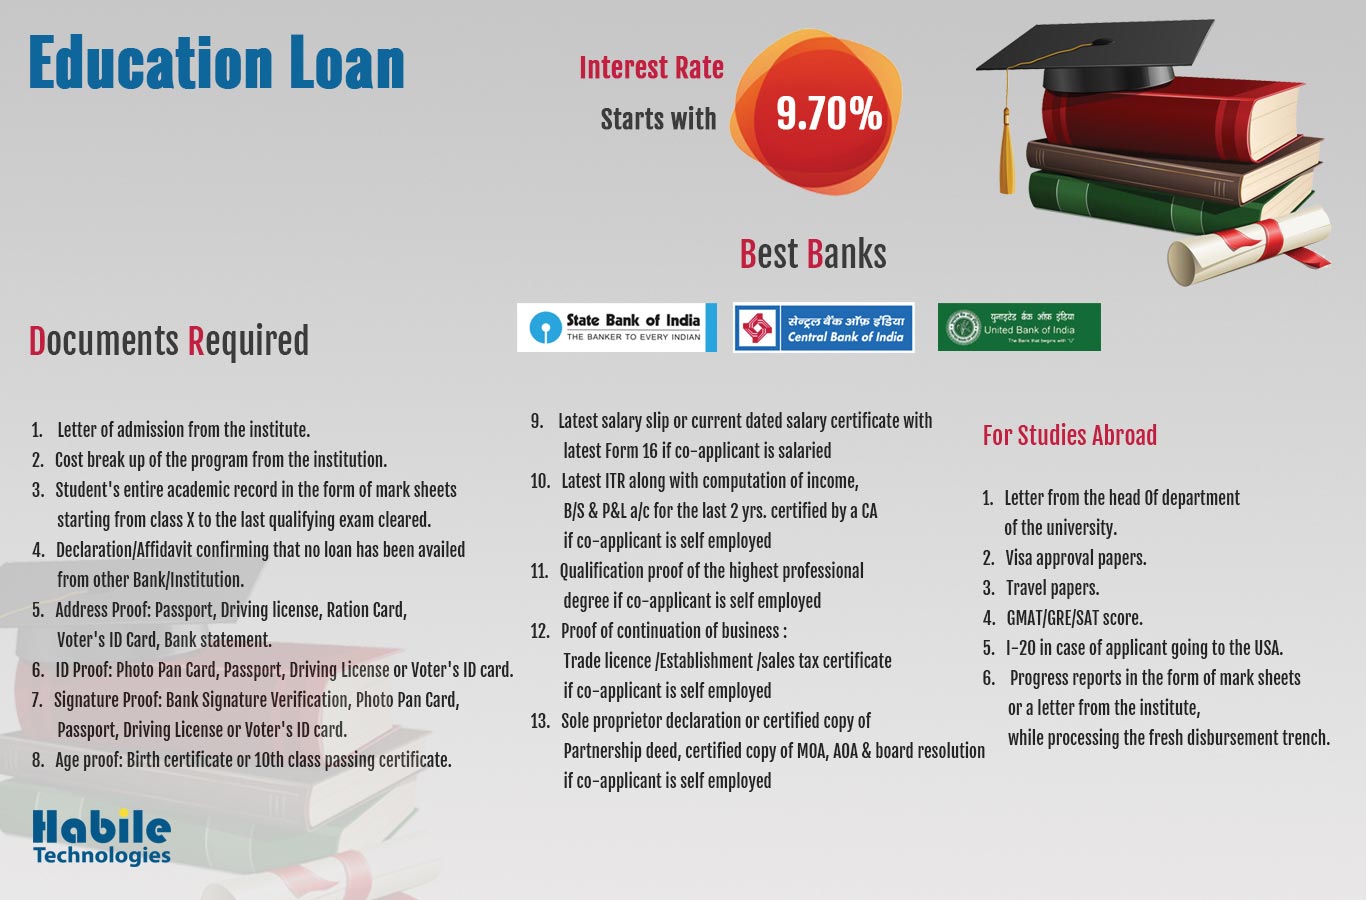 Documents required for Education Loan